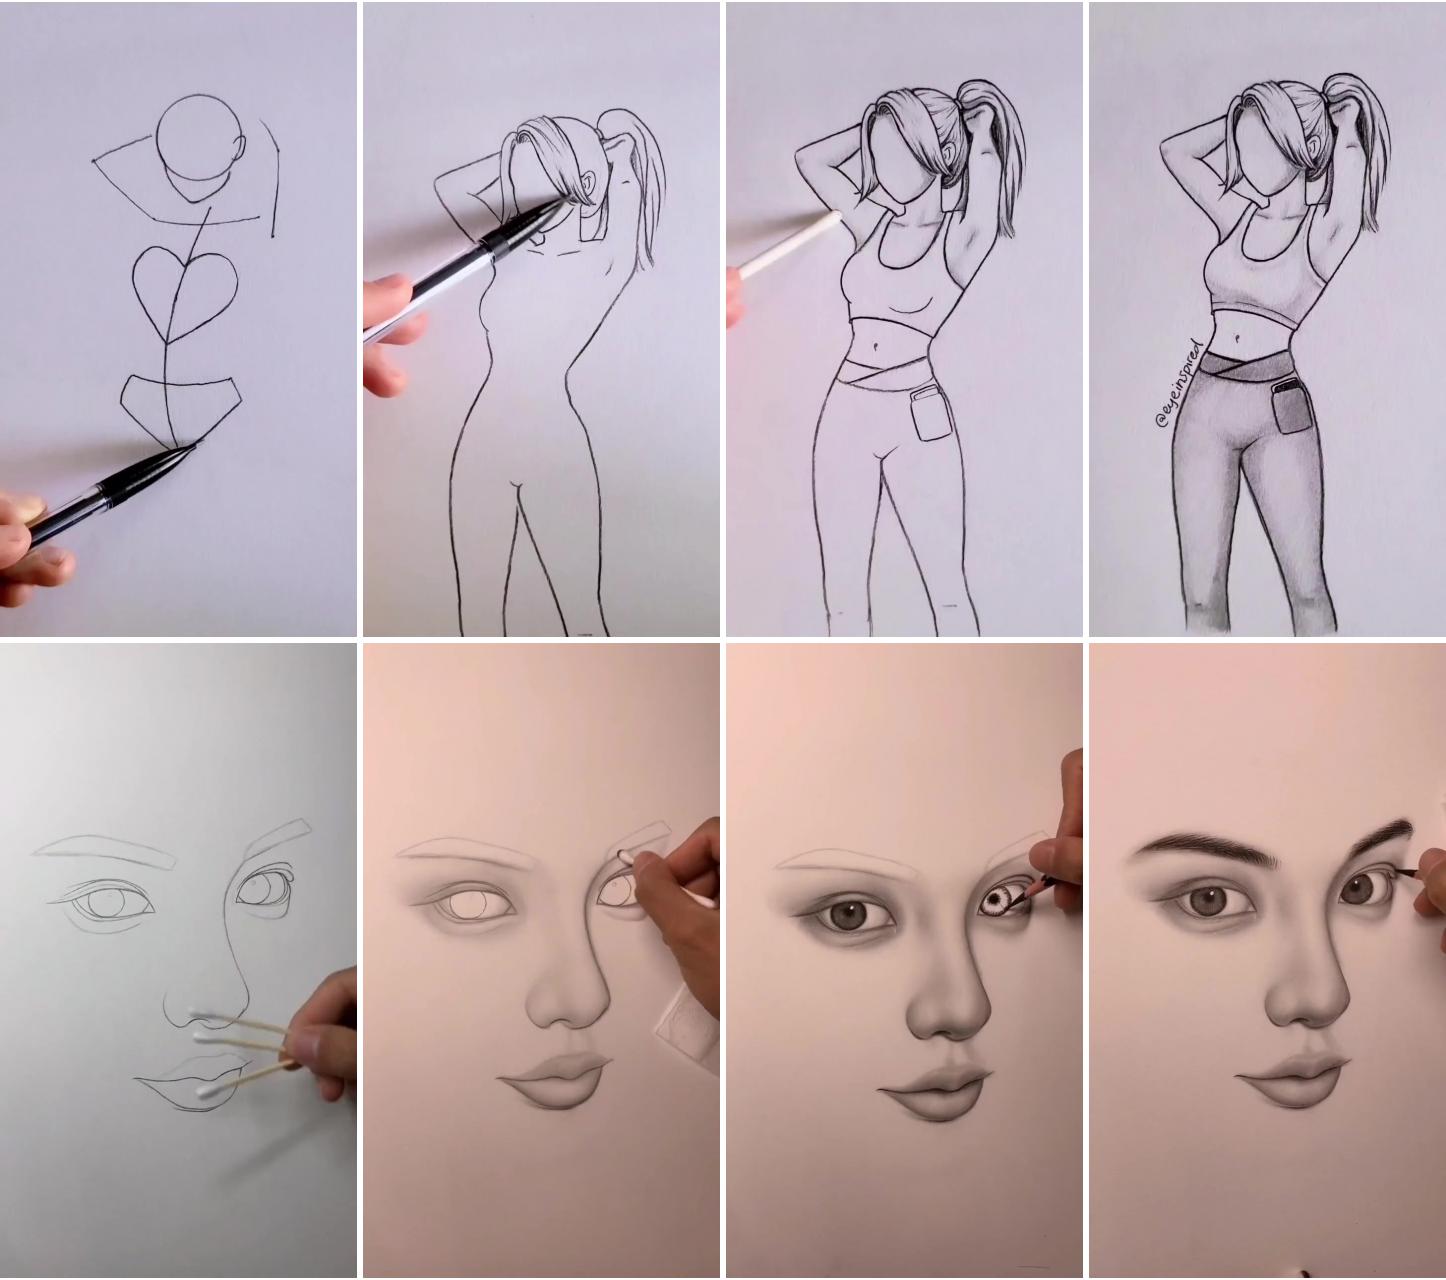 How to draw a girl body step by step by eyeinspired | how to draw a face - step by step